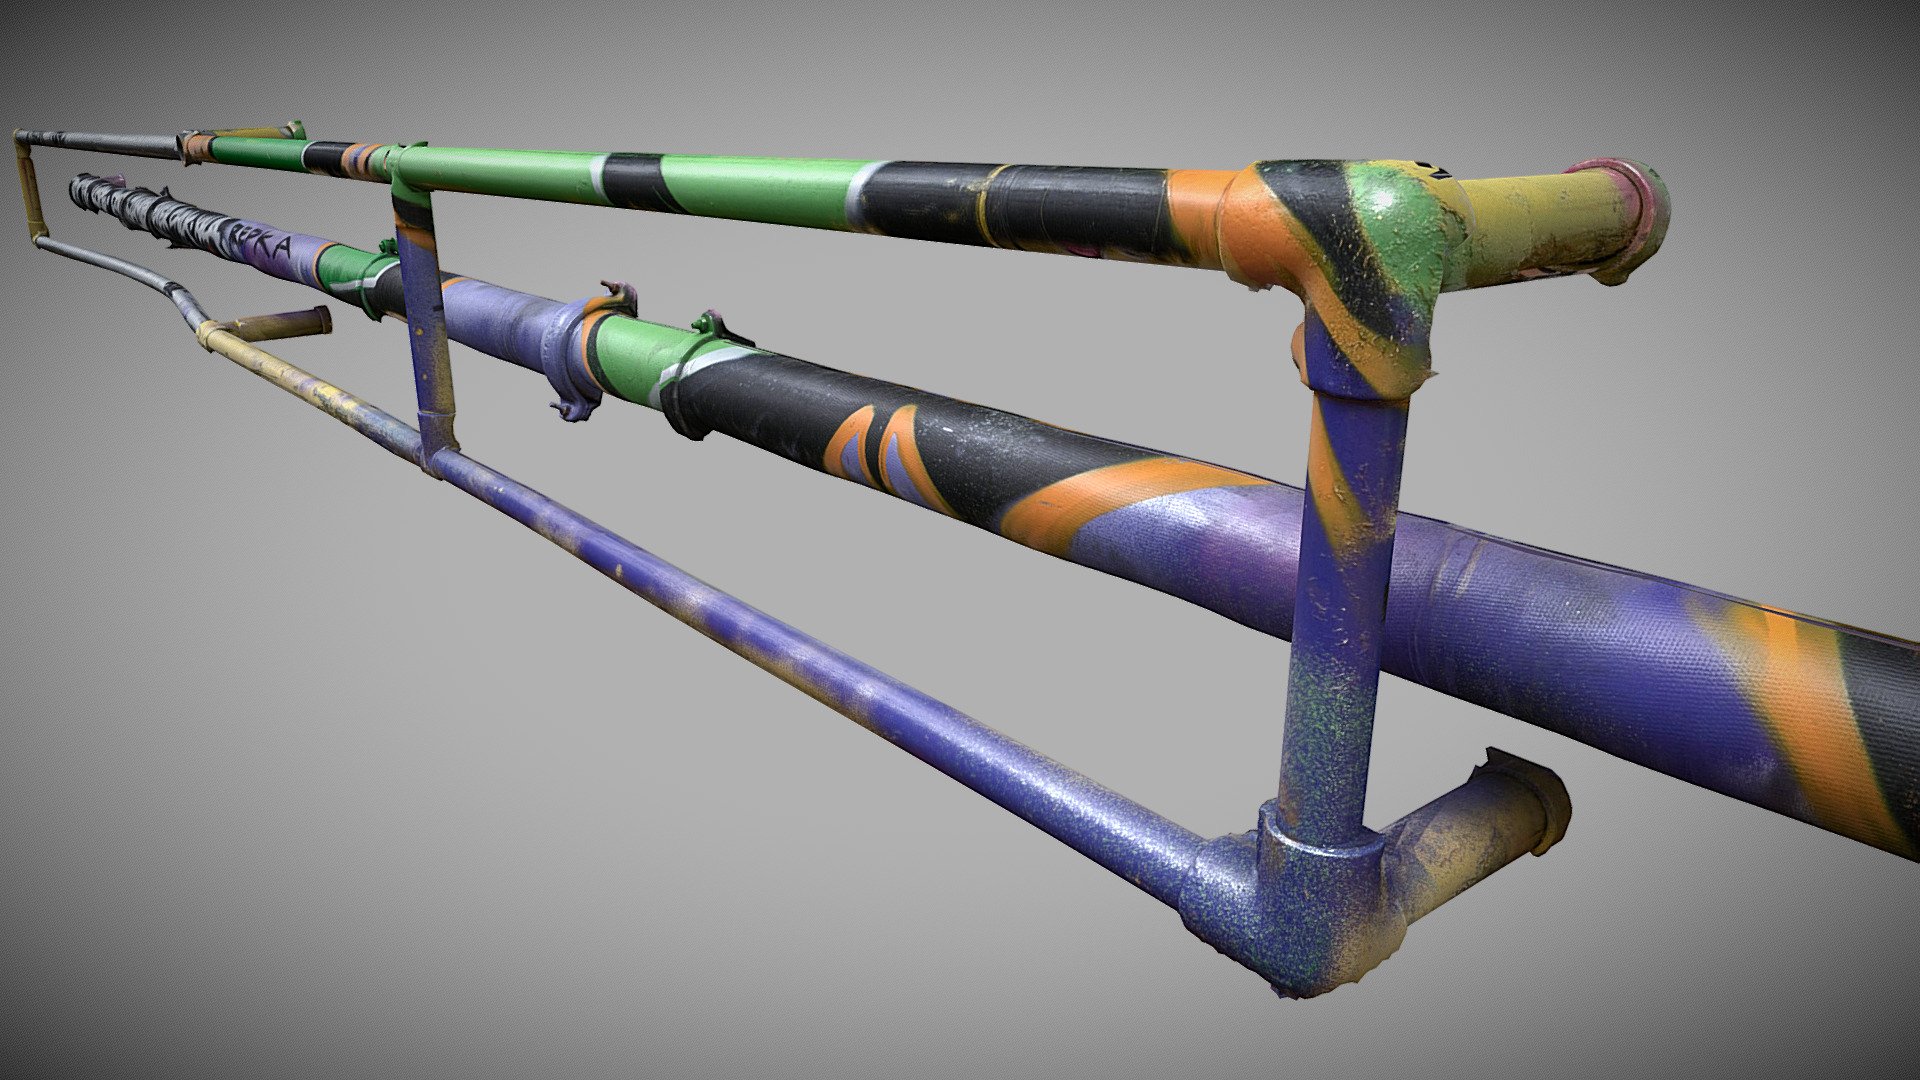 London

Pipe scan No. 5

pipes with grafitti, street art district in London

Urban &amp; Industrial collections

Good for adding realism to your urban / abandoned scenes

diffuse/normal/specular - Pipe scan No. 5 - Buy Royalty Free 3D model by 3Dystopia (@Dystopia) 3d model